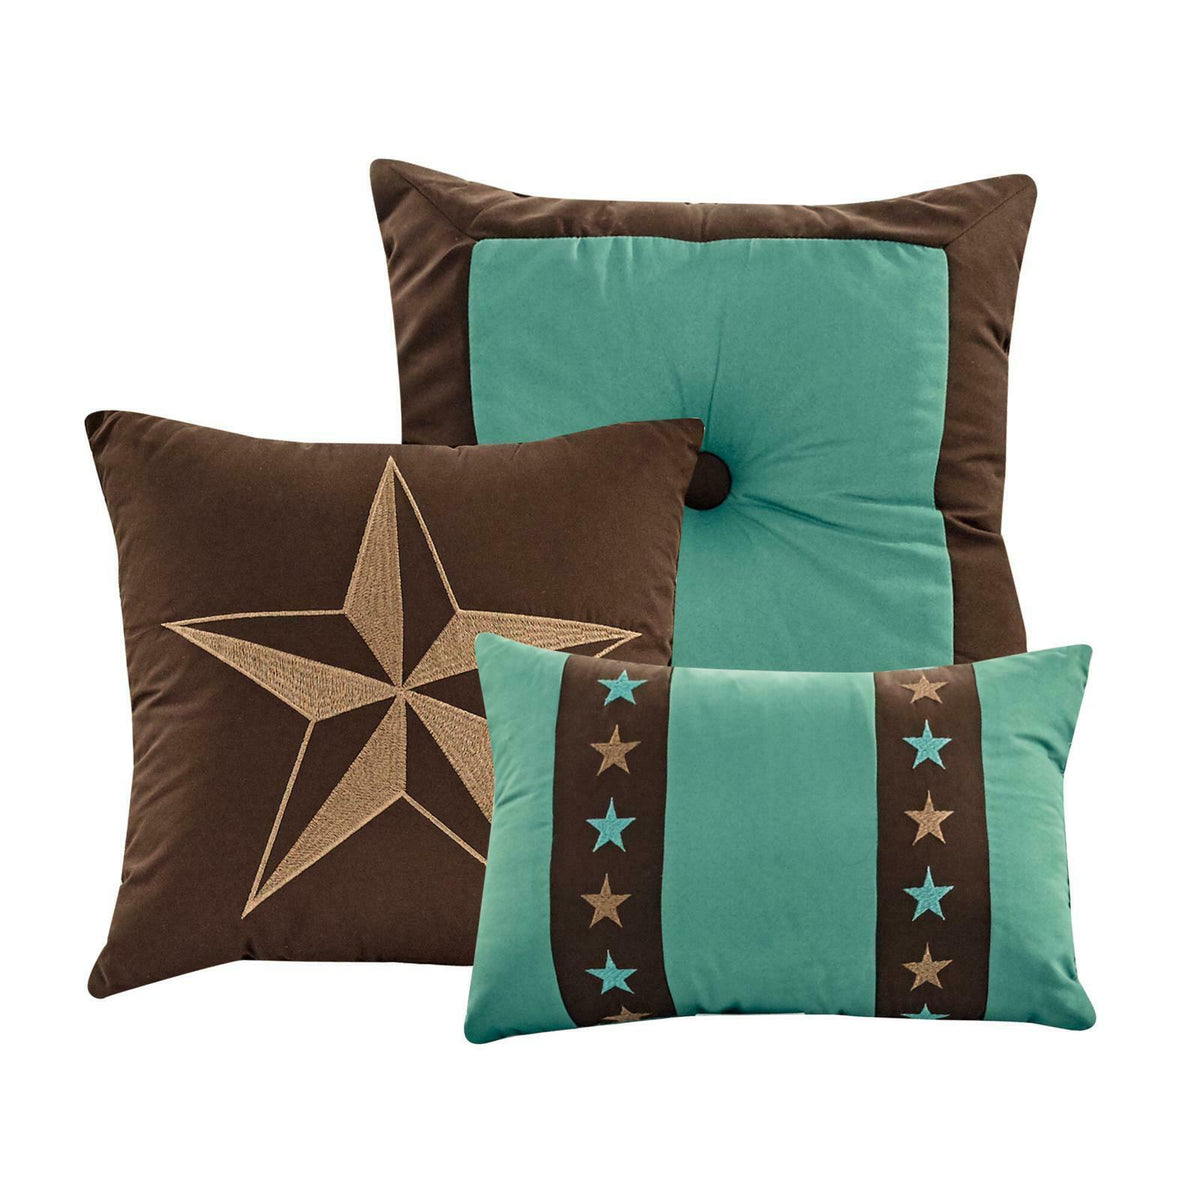 Turquoise Western Star Tapestry Pillow - Western Throw Pillows, Southwestern Bedding from Lone Star Western Decor